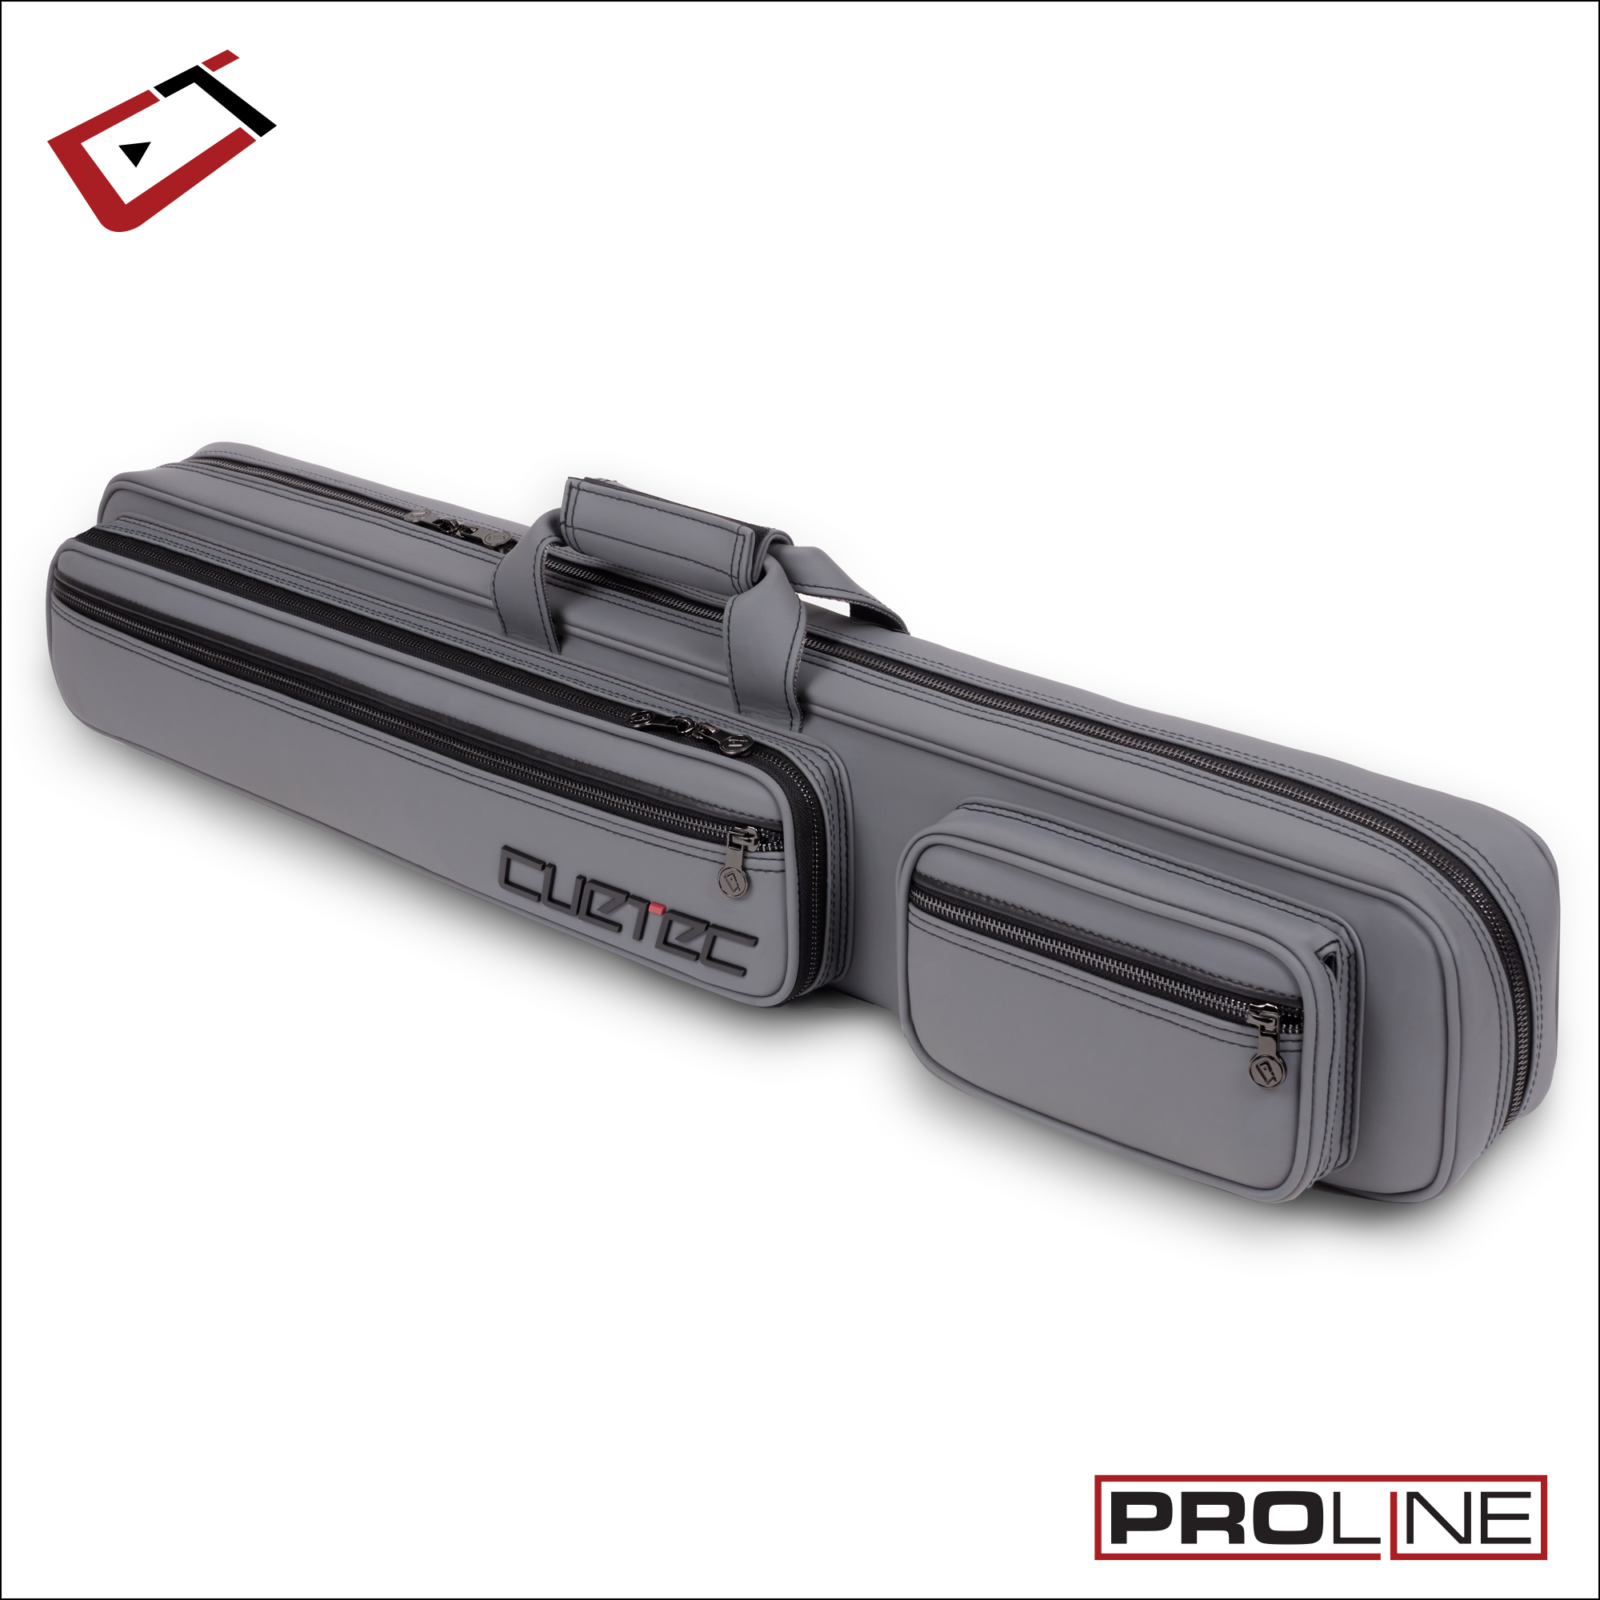 23 Cuetec Pro Line 4x8 Ghost Edition 95-756 3/4 View